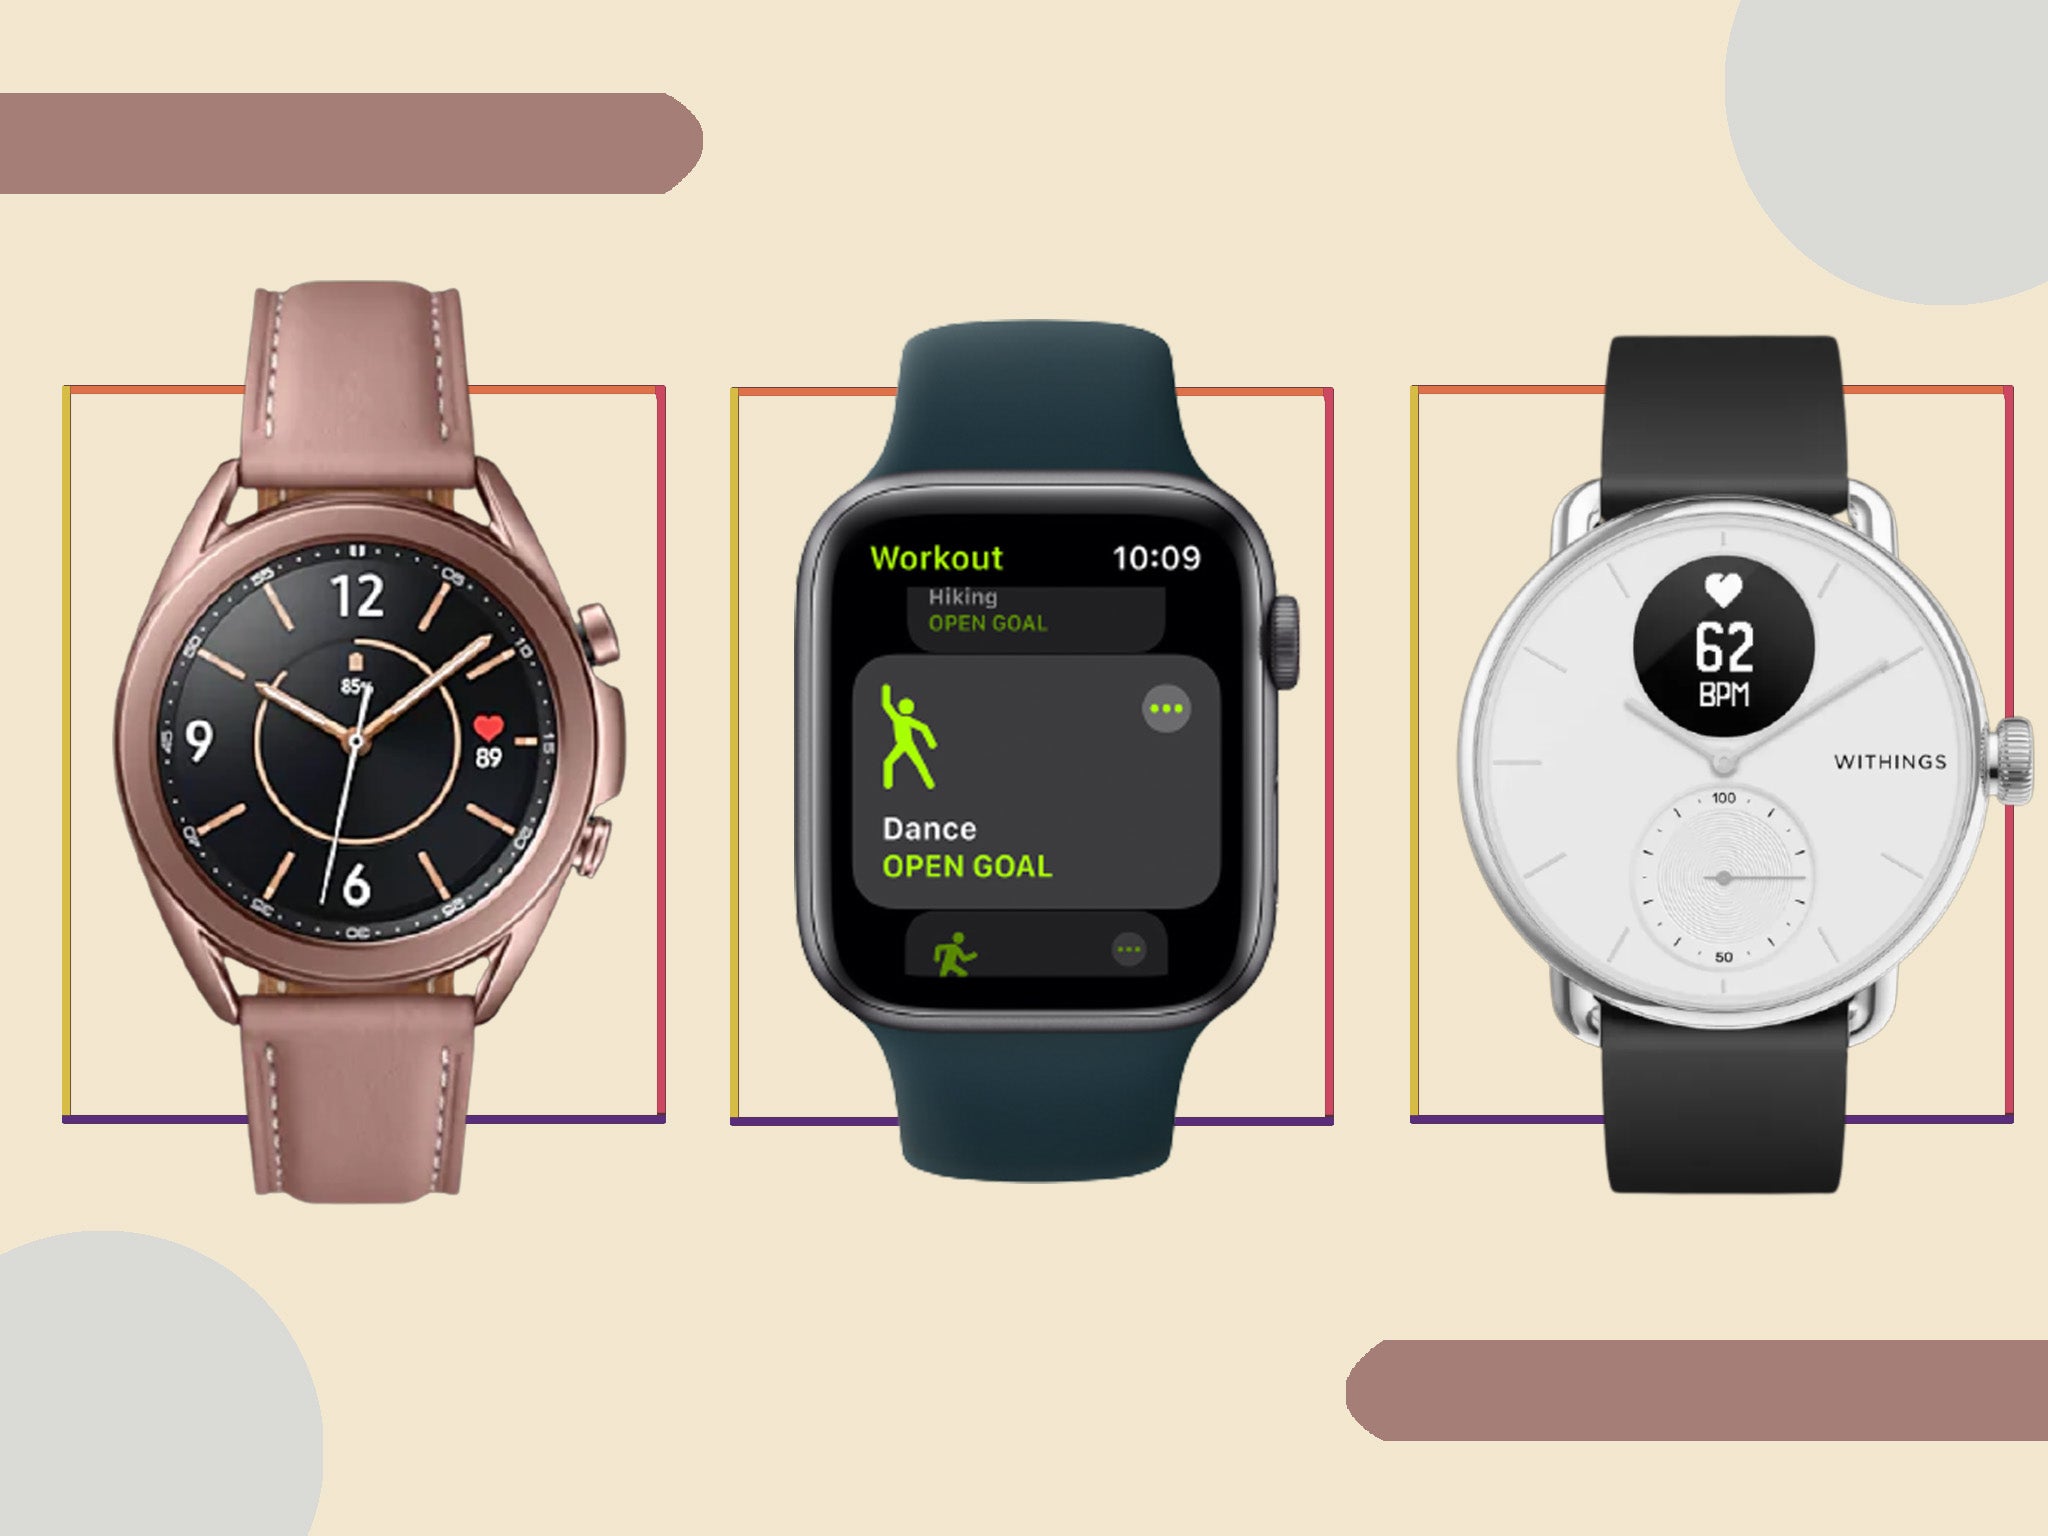 <p>Classic models are the most advanced, but fitness trackers and hybrids may provide you with all you need</p>